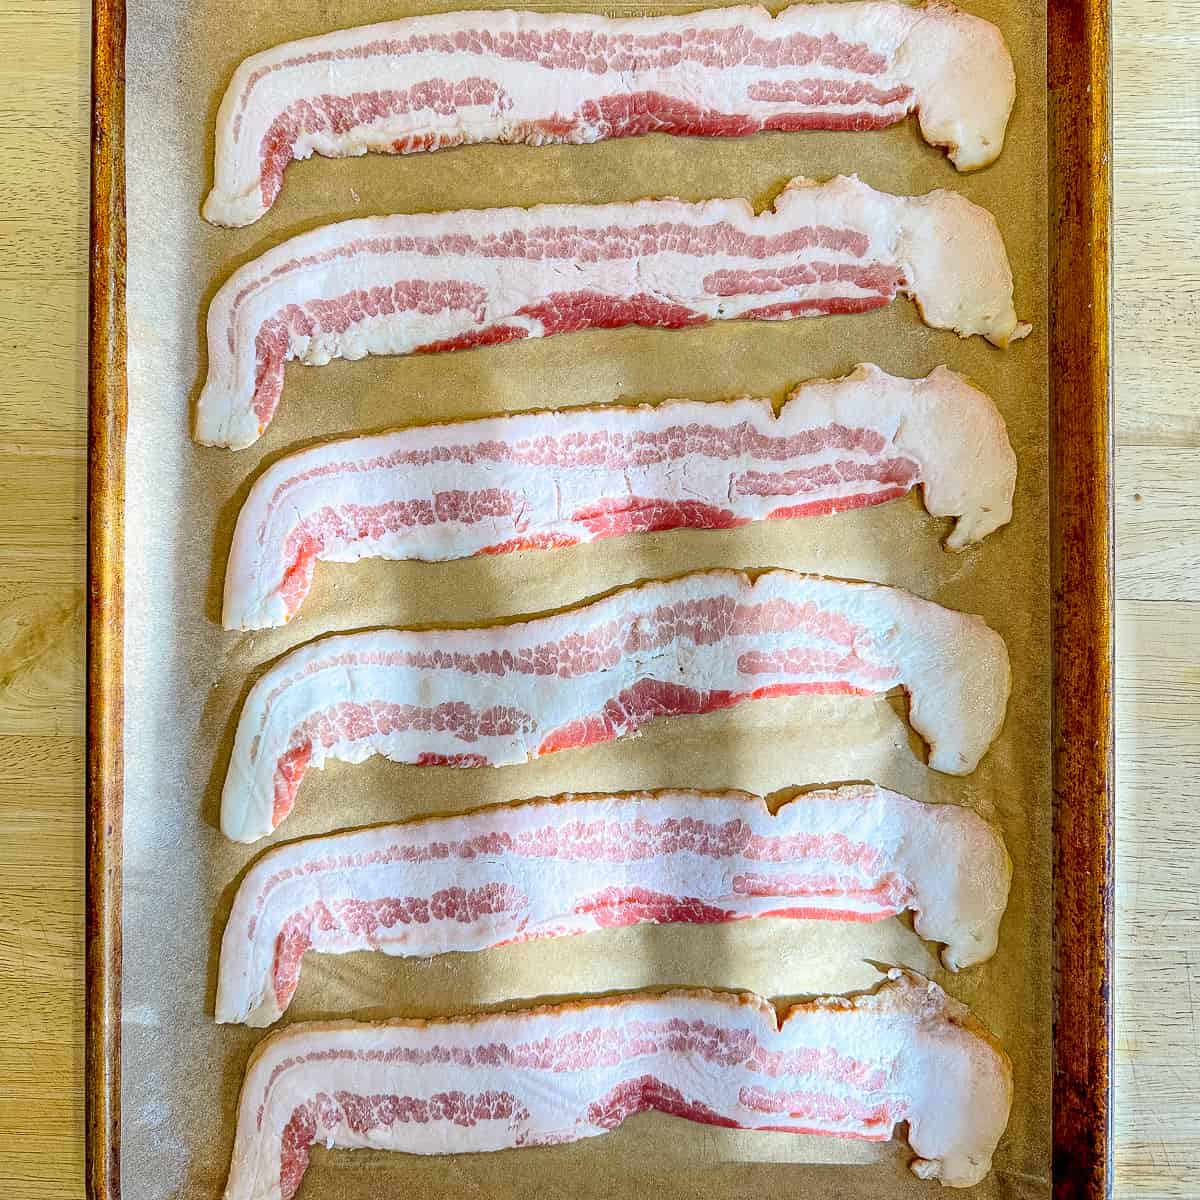 uncooked bacon on a sheet pan.